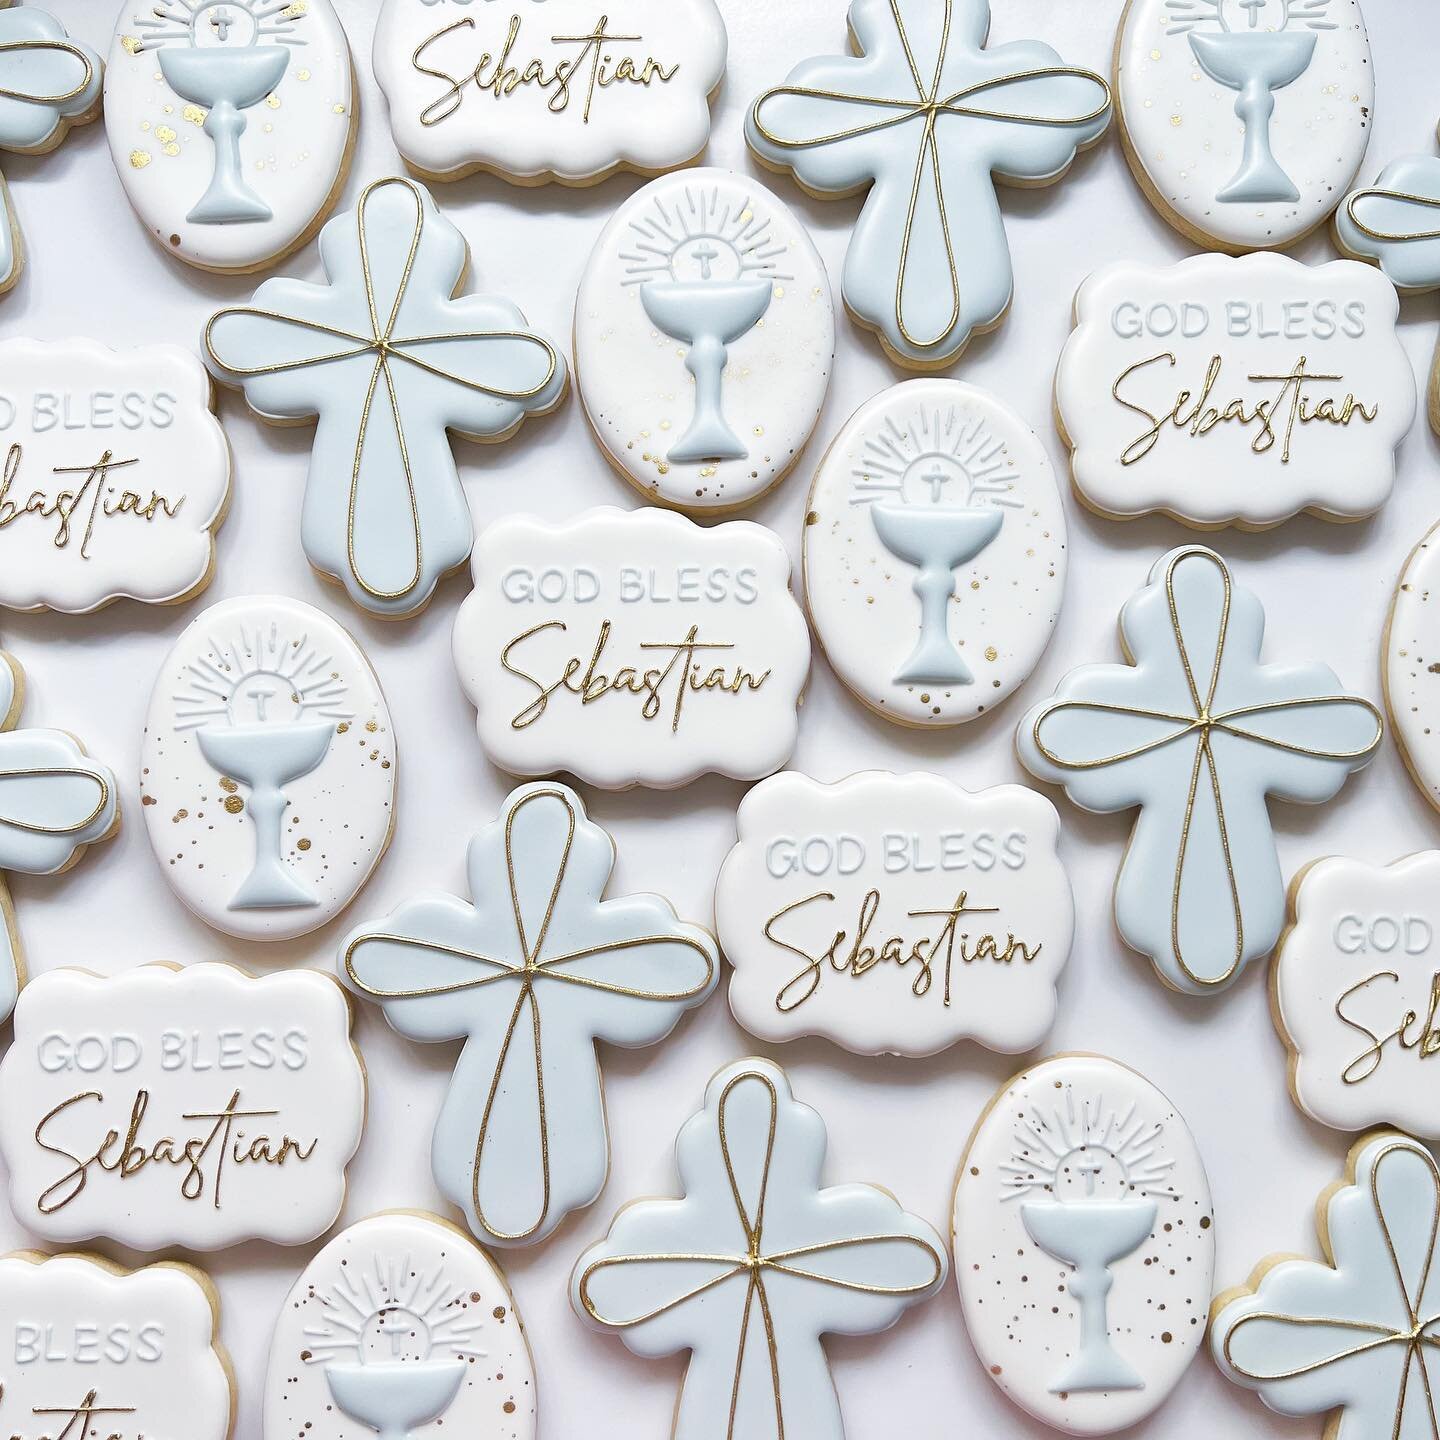 God Bless✝️

Cookies are the perfect addition to baptisms, communions and confirmations! There are so many beautiful designs that can be customized to match the decor for your event!

Head to the link in my bio to request a quote for your next event!